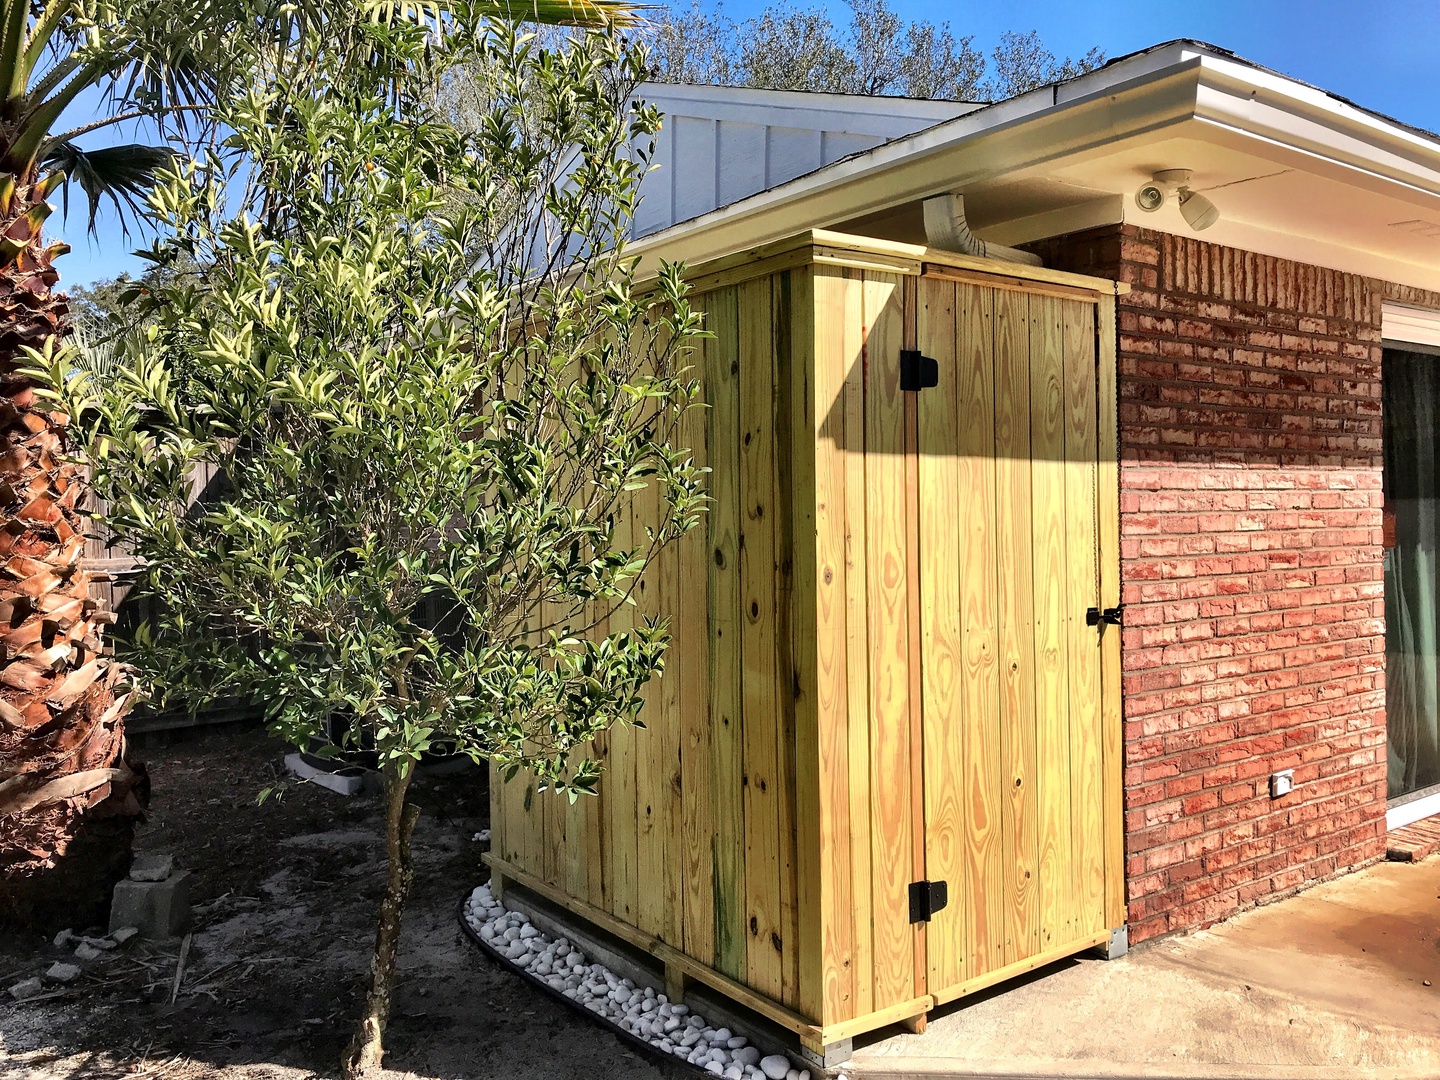 You'll love the outdoor hot shower with privacy enclosure/door!